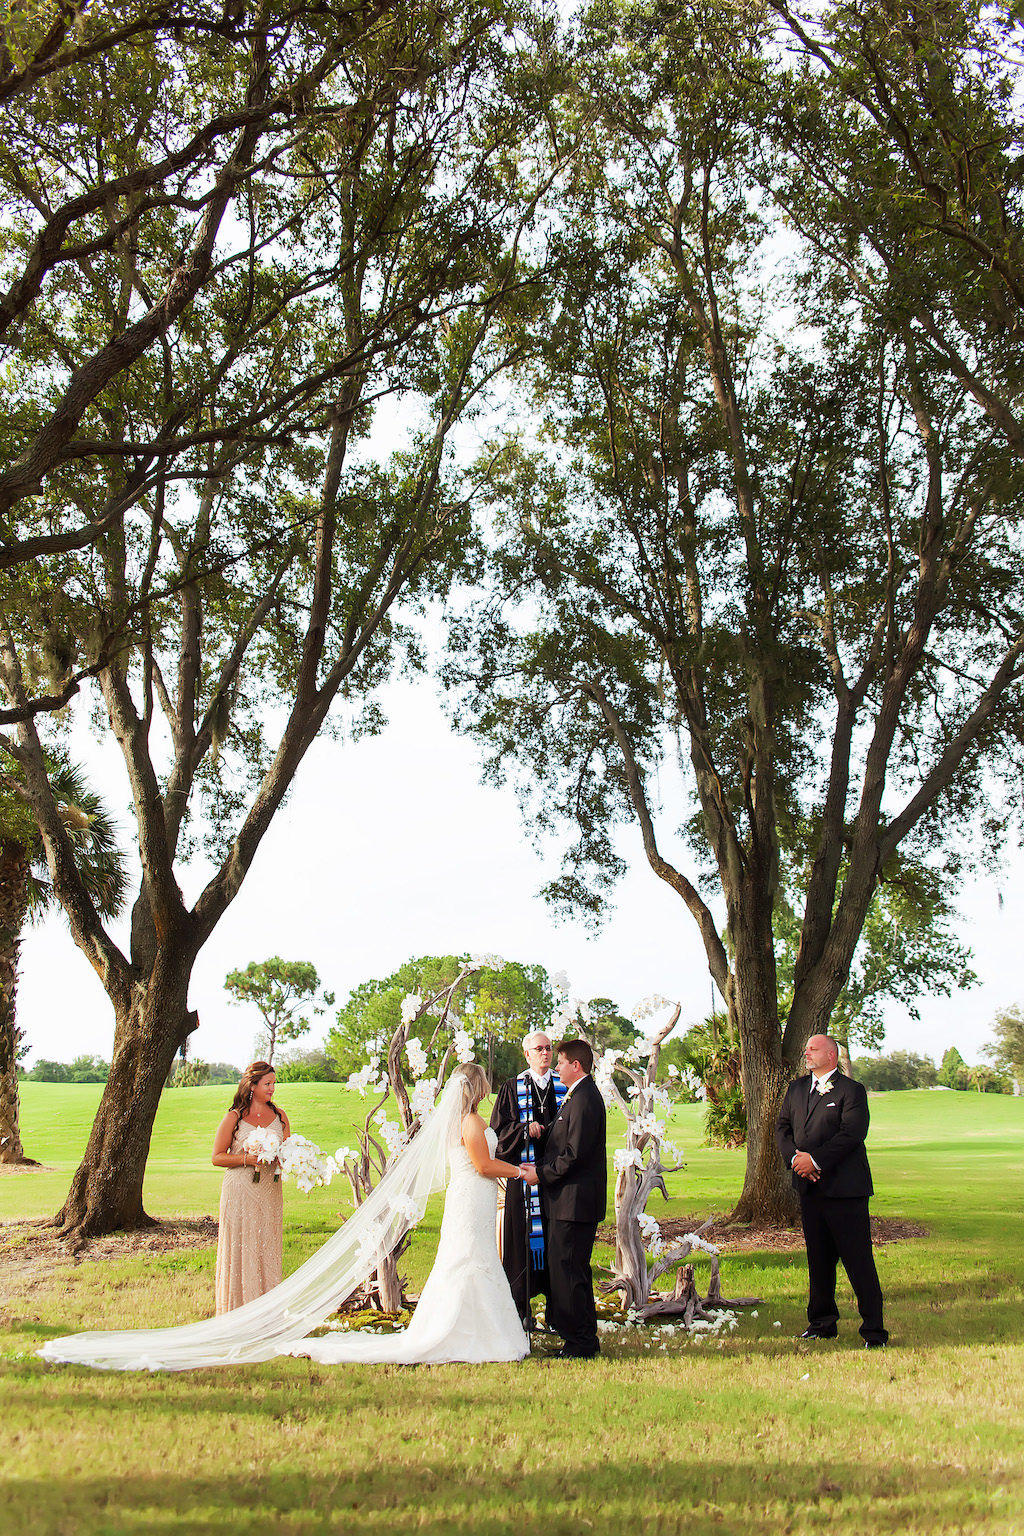 Outdoor Garden Wedding Ceremony Portrait with Bride with Cathedral Train and Driftwood White Floral Wedding Arch | Clearwater Wedding Photographer Limelight Photography | Golf Course Wedding Venue Countryside Country Club